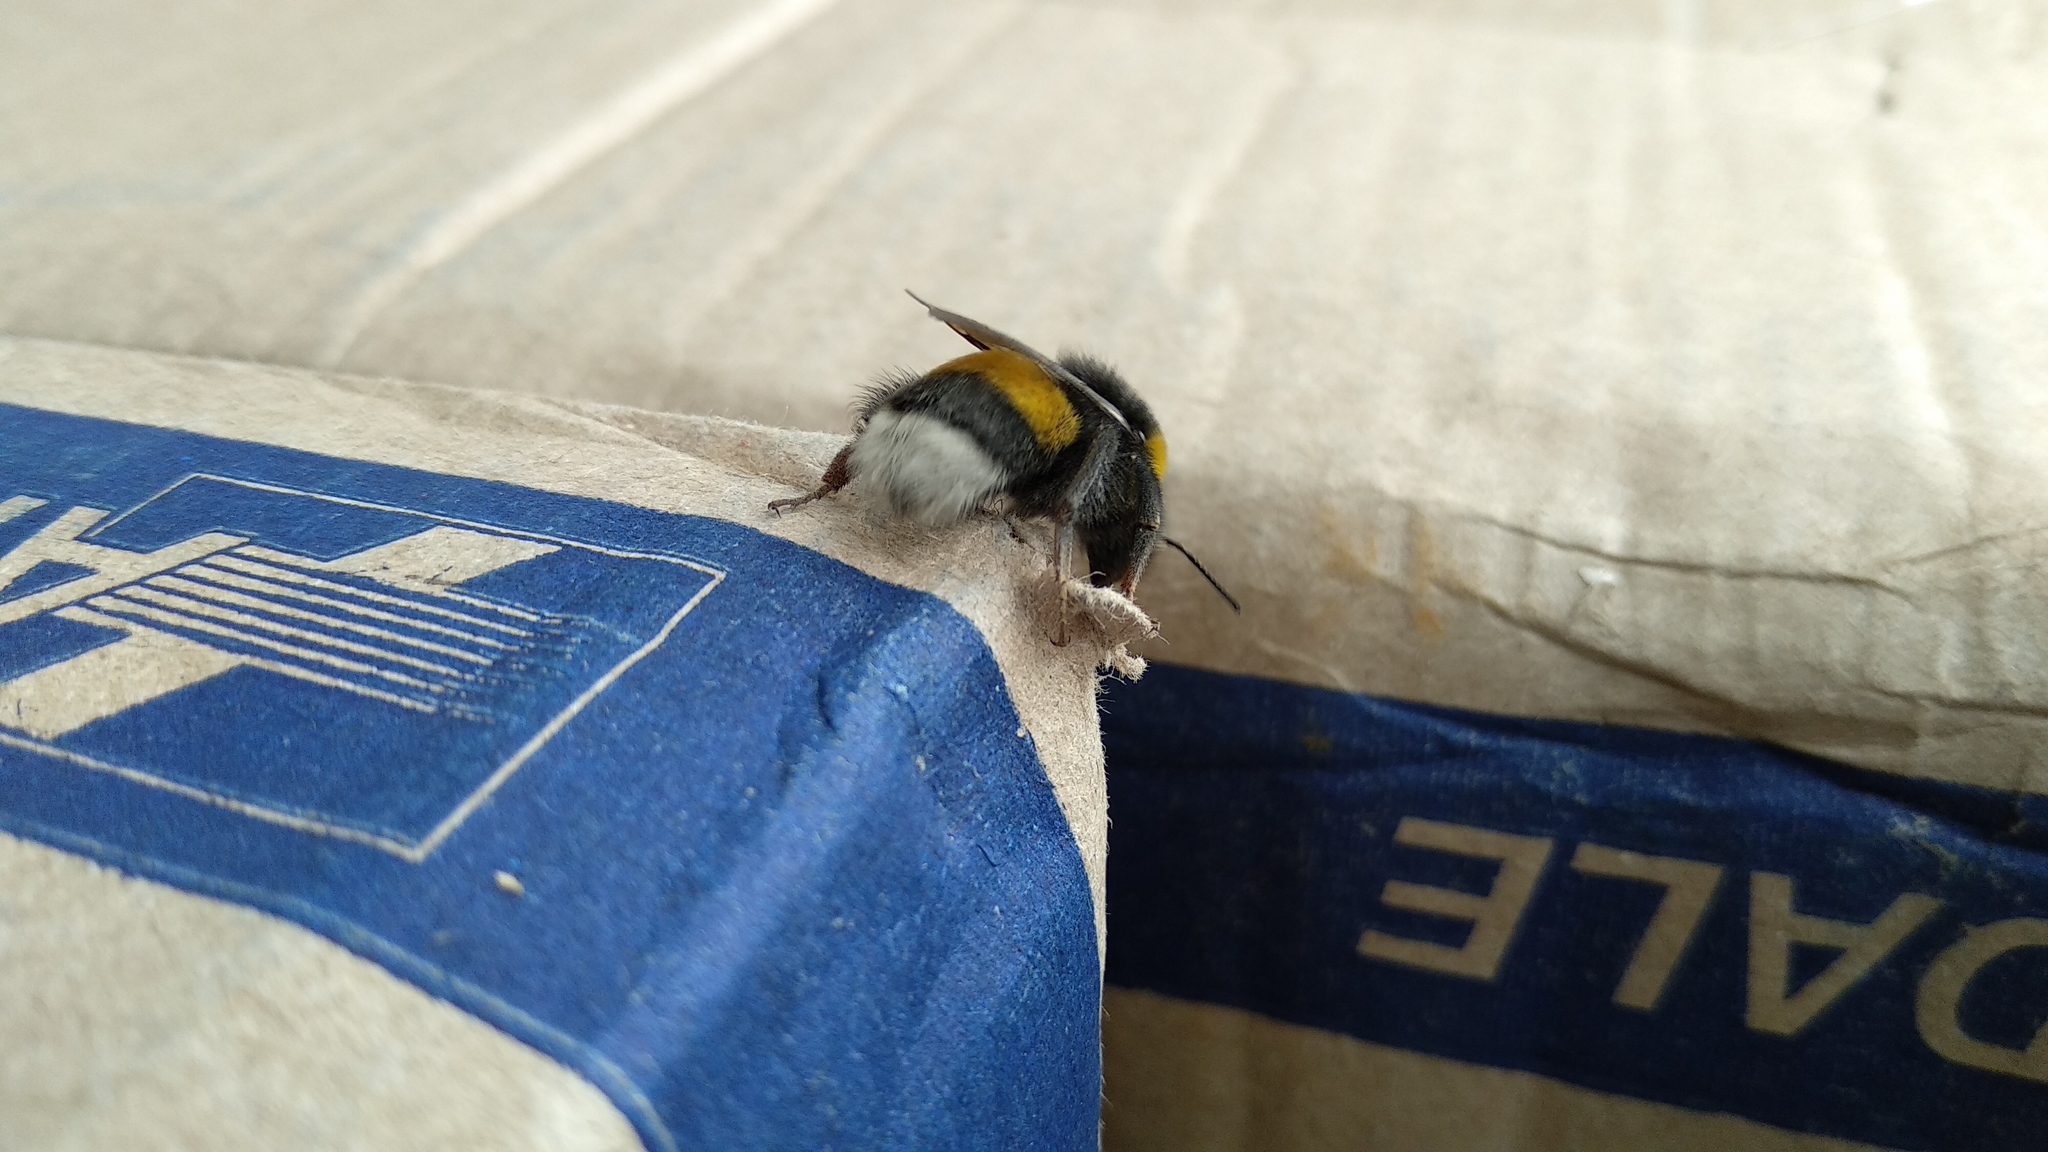 Shemale butt for a friend - My, Bumblebee, The photo, Work, Longpost, Comments on Peekaboo